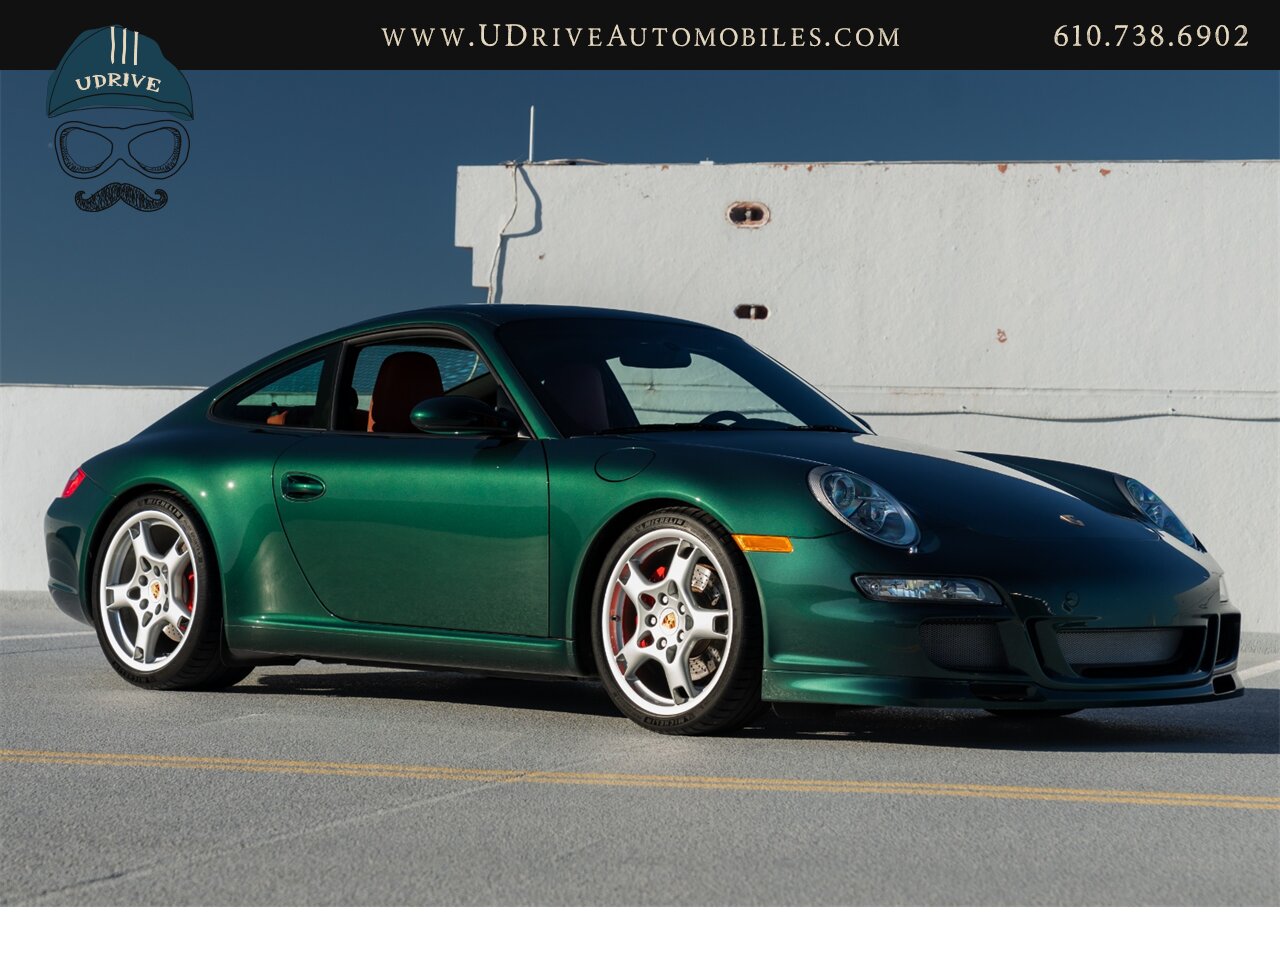 2007 Porsche 911 Carrera S 6Spd 997S RARE X51 Power Kit 381hp  1 of a Kind Forest Green over Blk/Terracotta Chrono Adap Sport Sts $113k MSRP - Photo 14 - West Chester, PA 19382